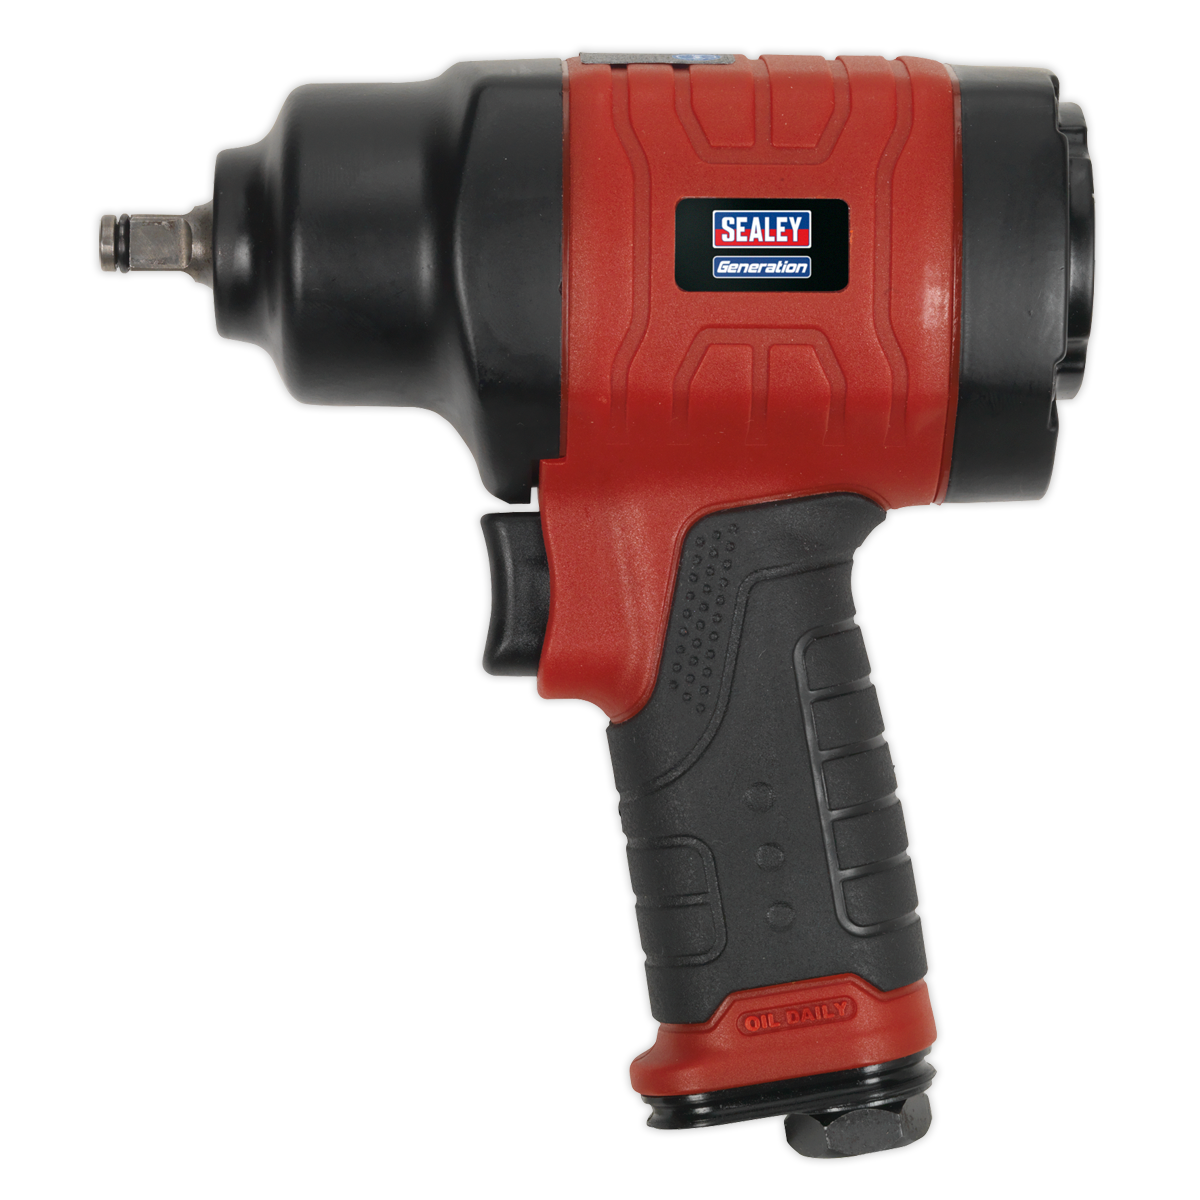 Composite Air Impact Wrench 3/8"Sq Drive - Twin Hammer